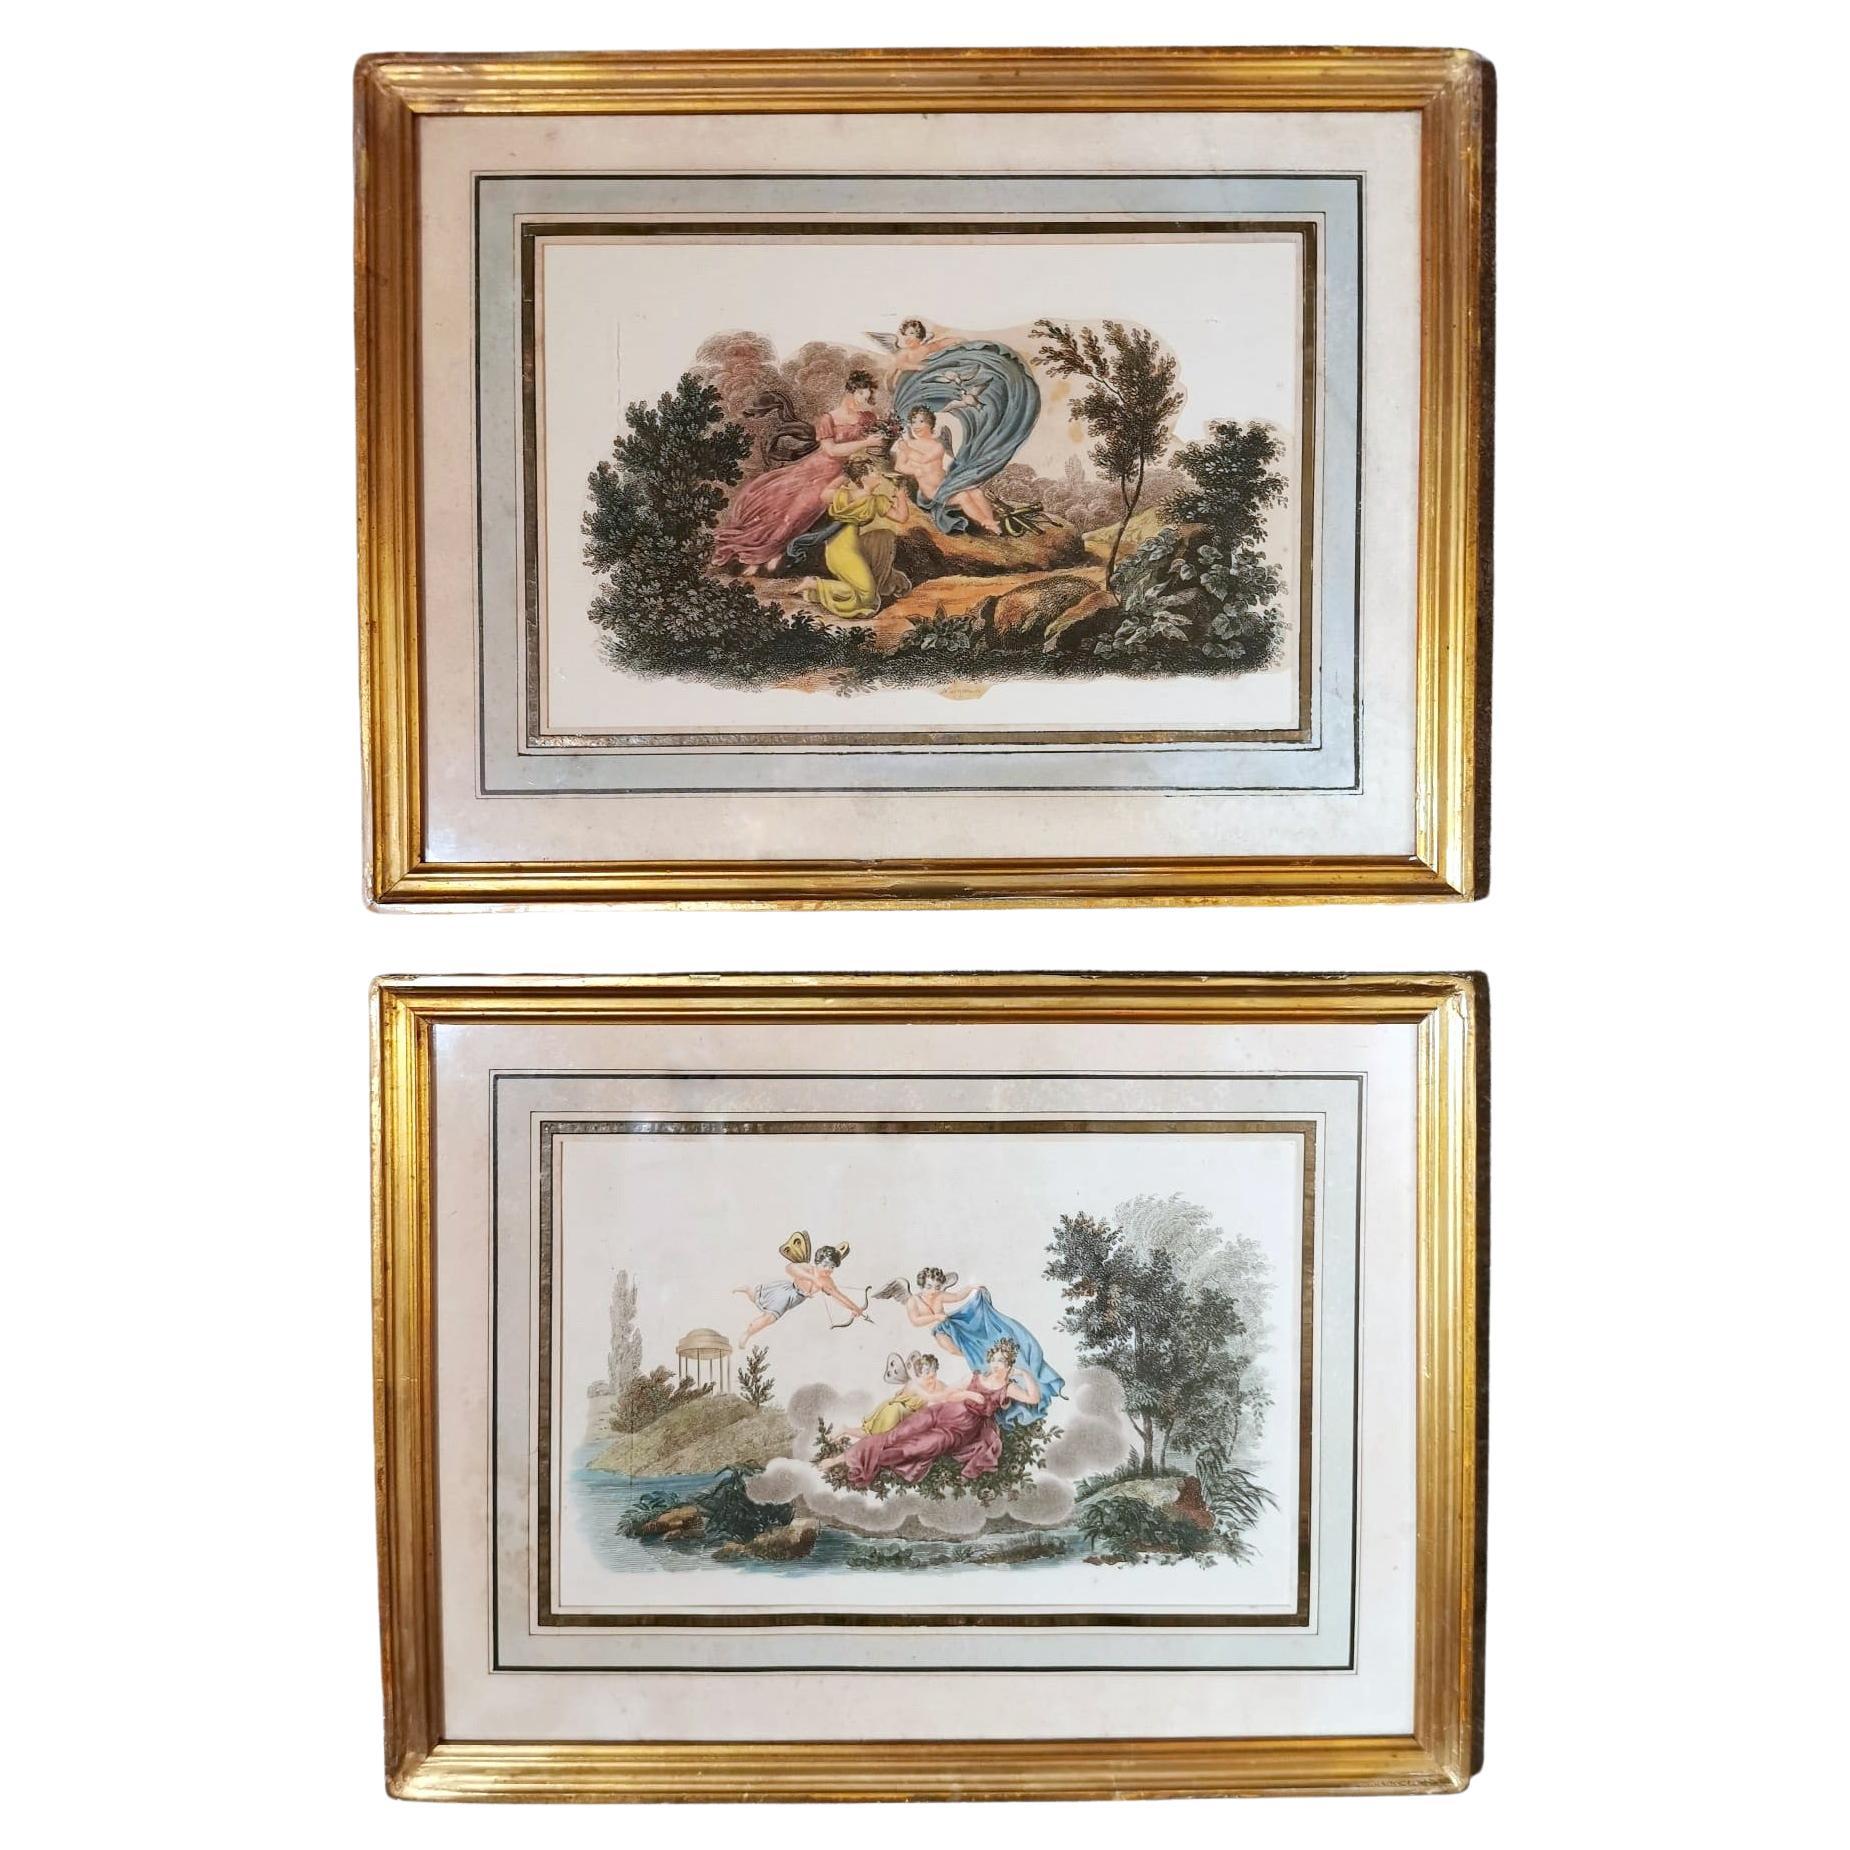 Nargeol Adrien Pair Prints Painted Watercolor with Gilded Frames